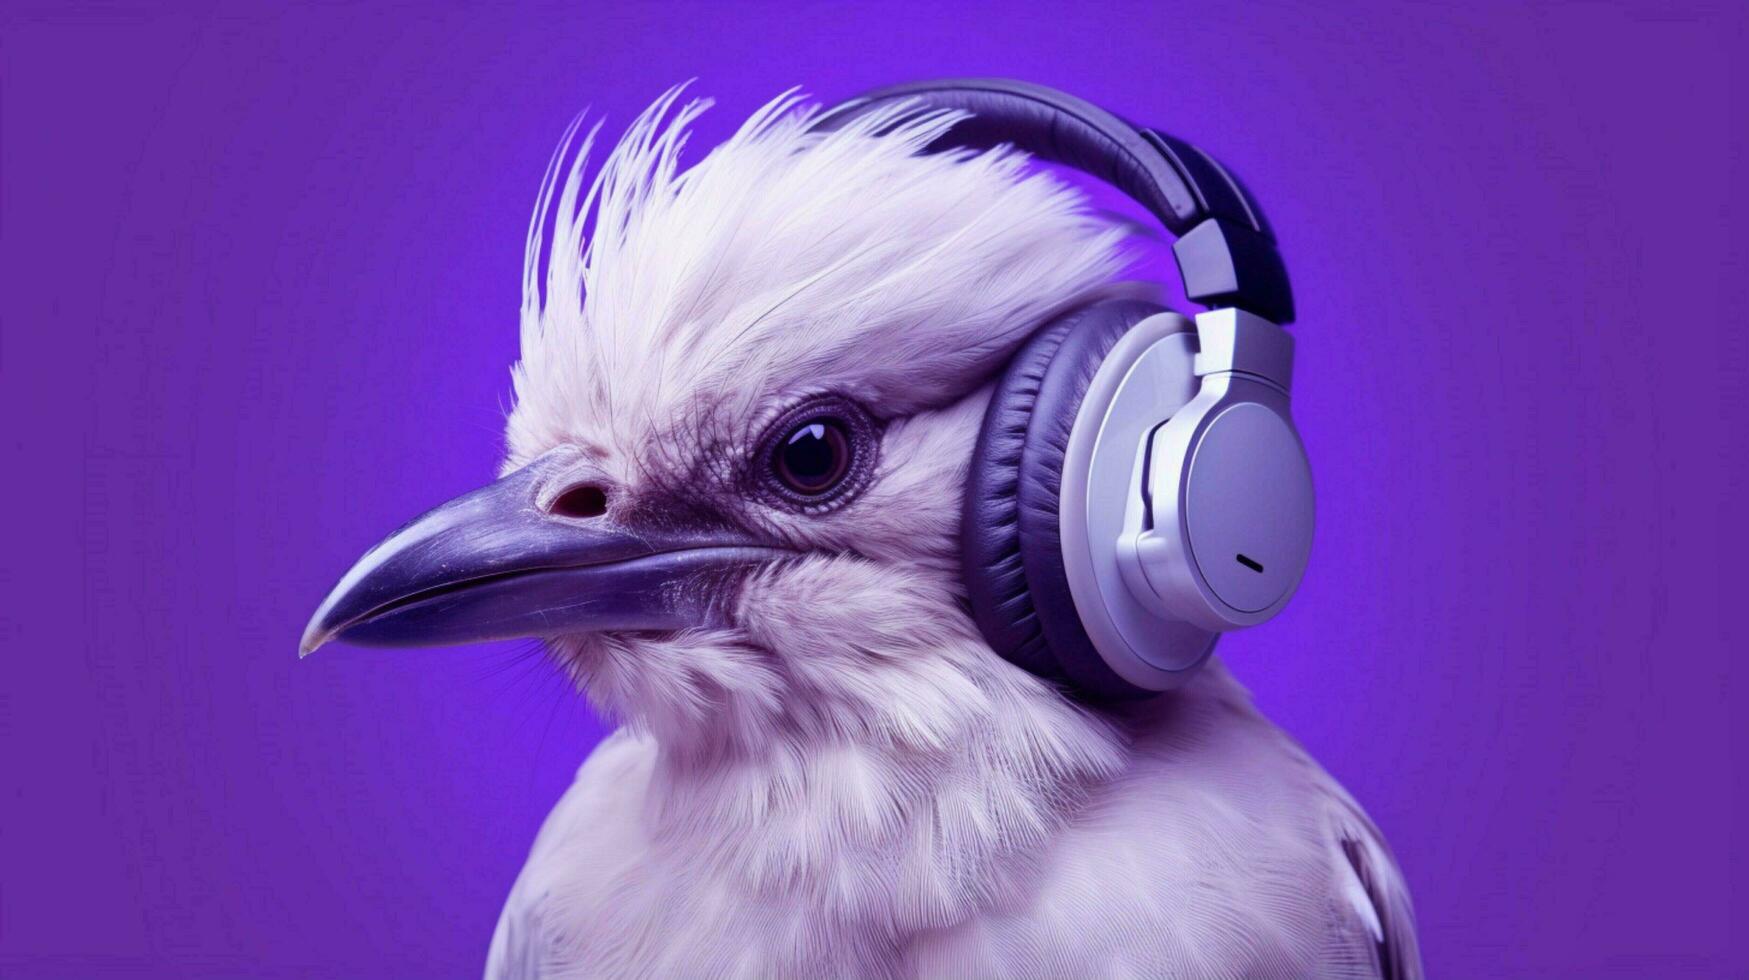 a bird with headphones and a purple background photo